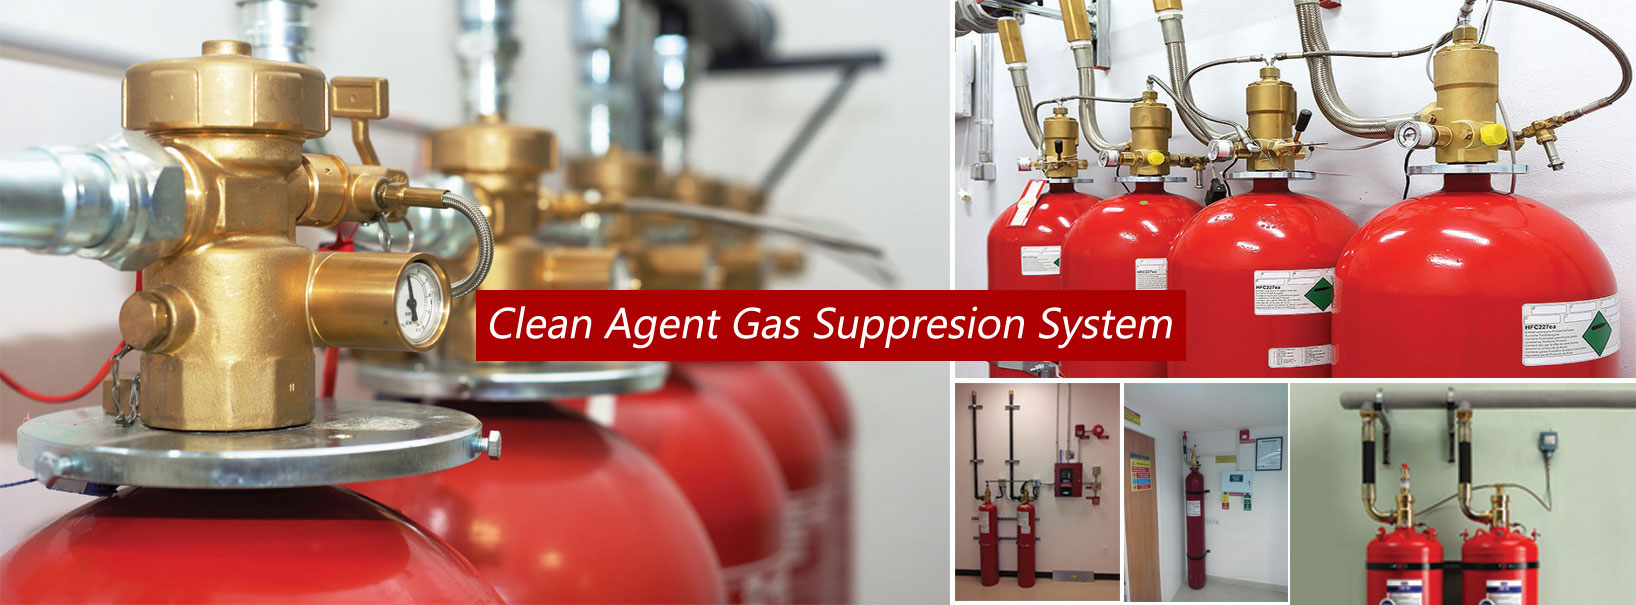 Clean Agent Gas Suppression System